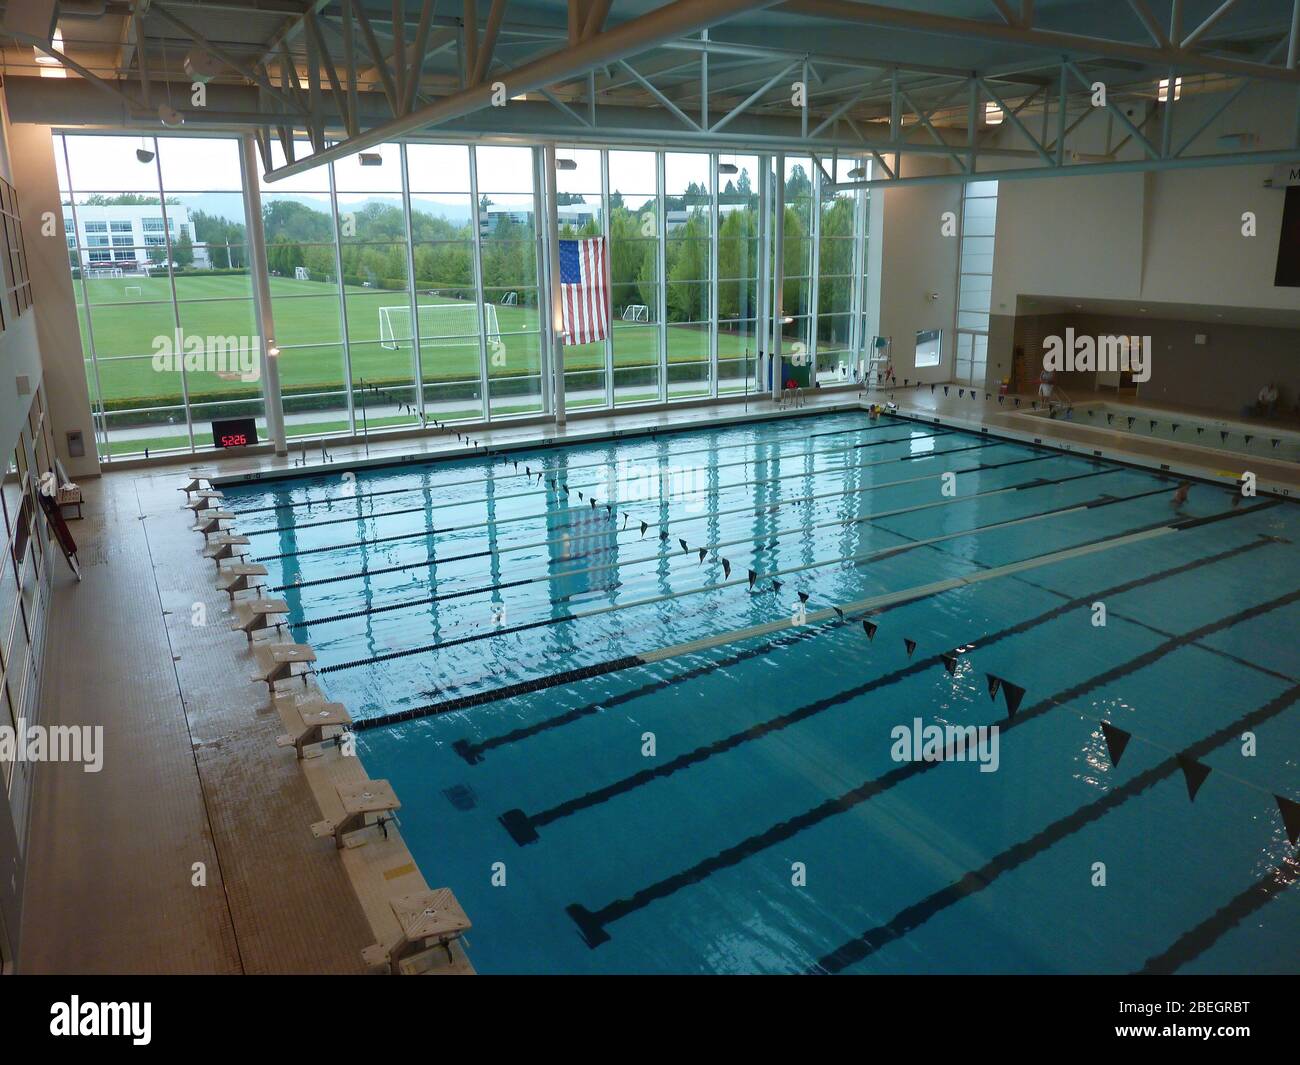 Oregon, AUG 7, 2009 - Interior view of a swimming pool of Nike World  Headquarters Stock Photo - Alamy